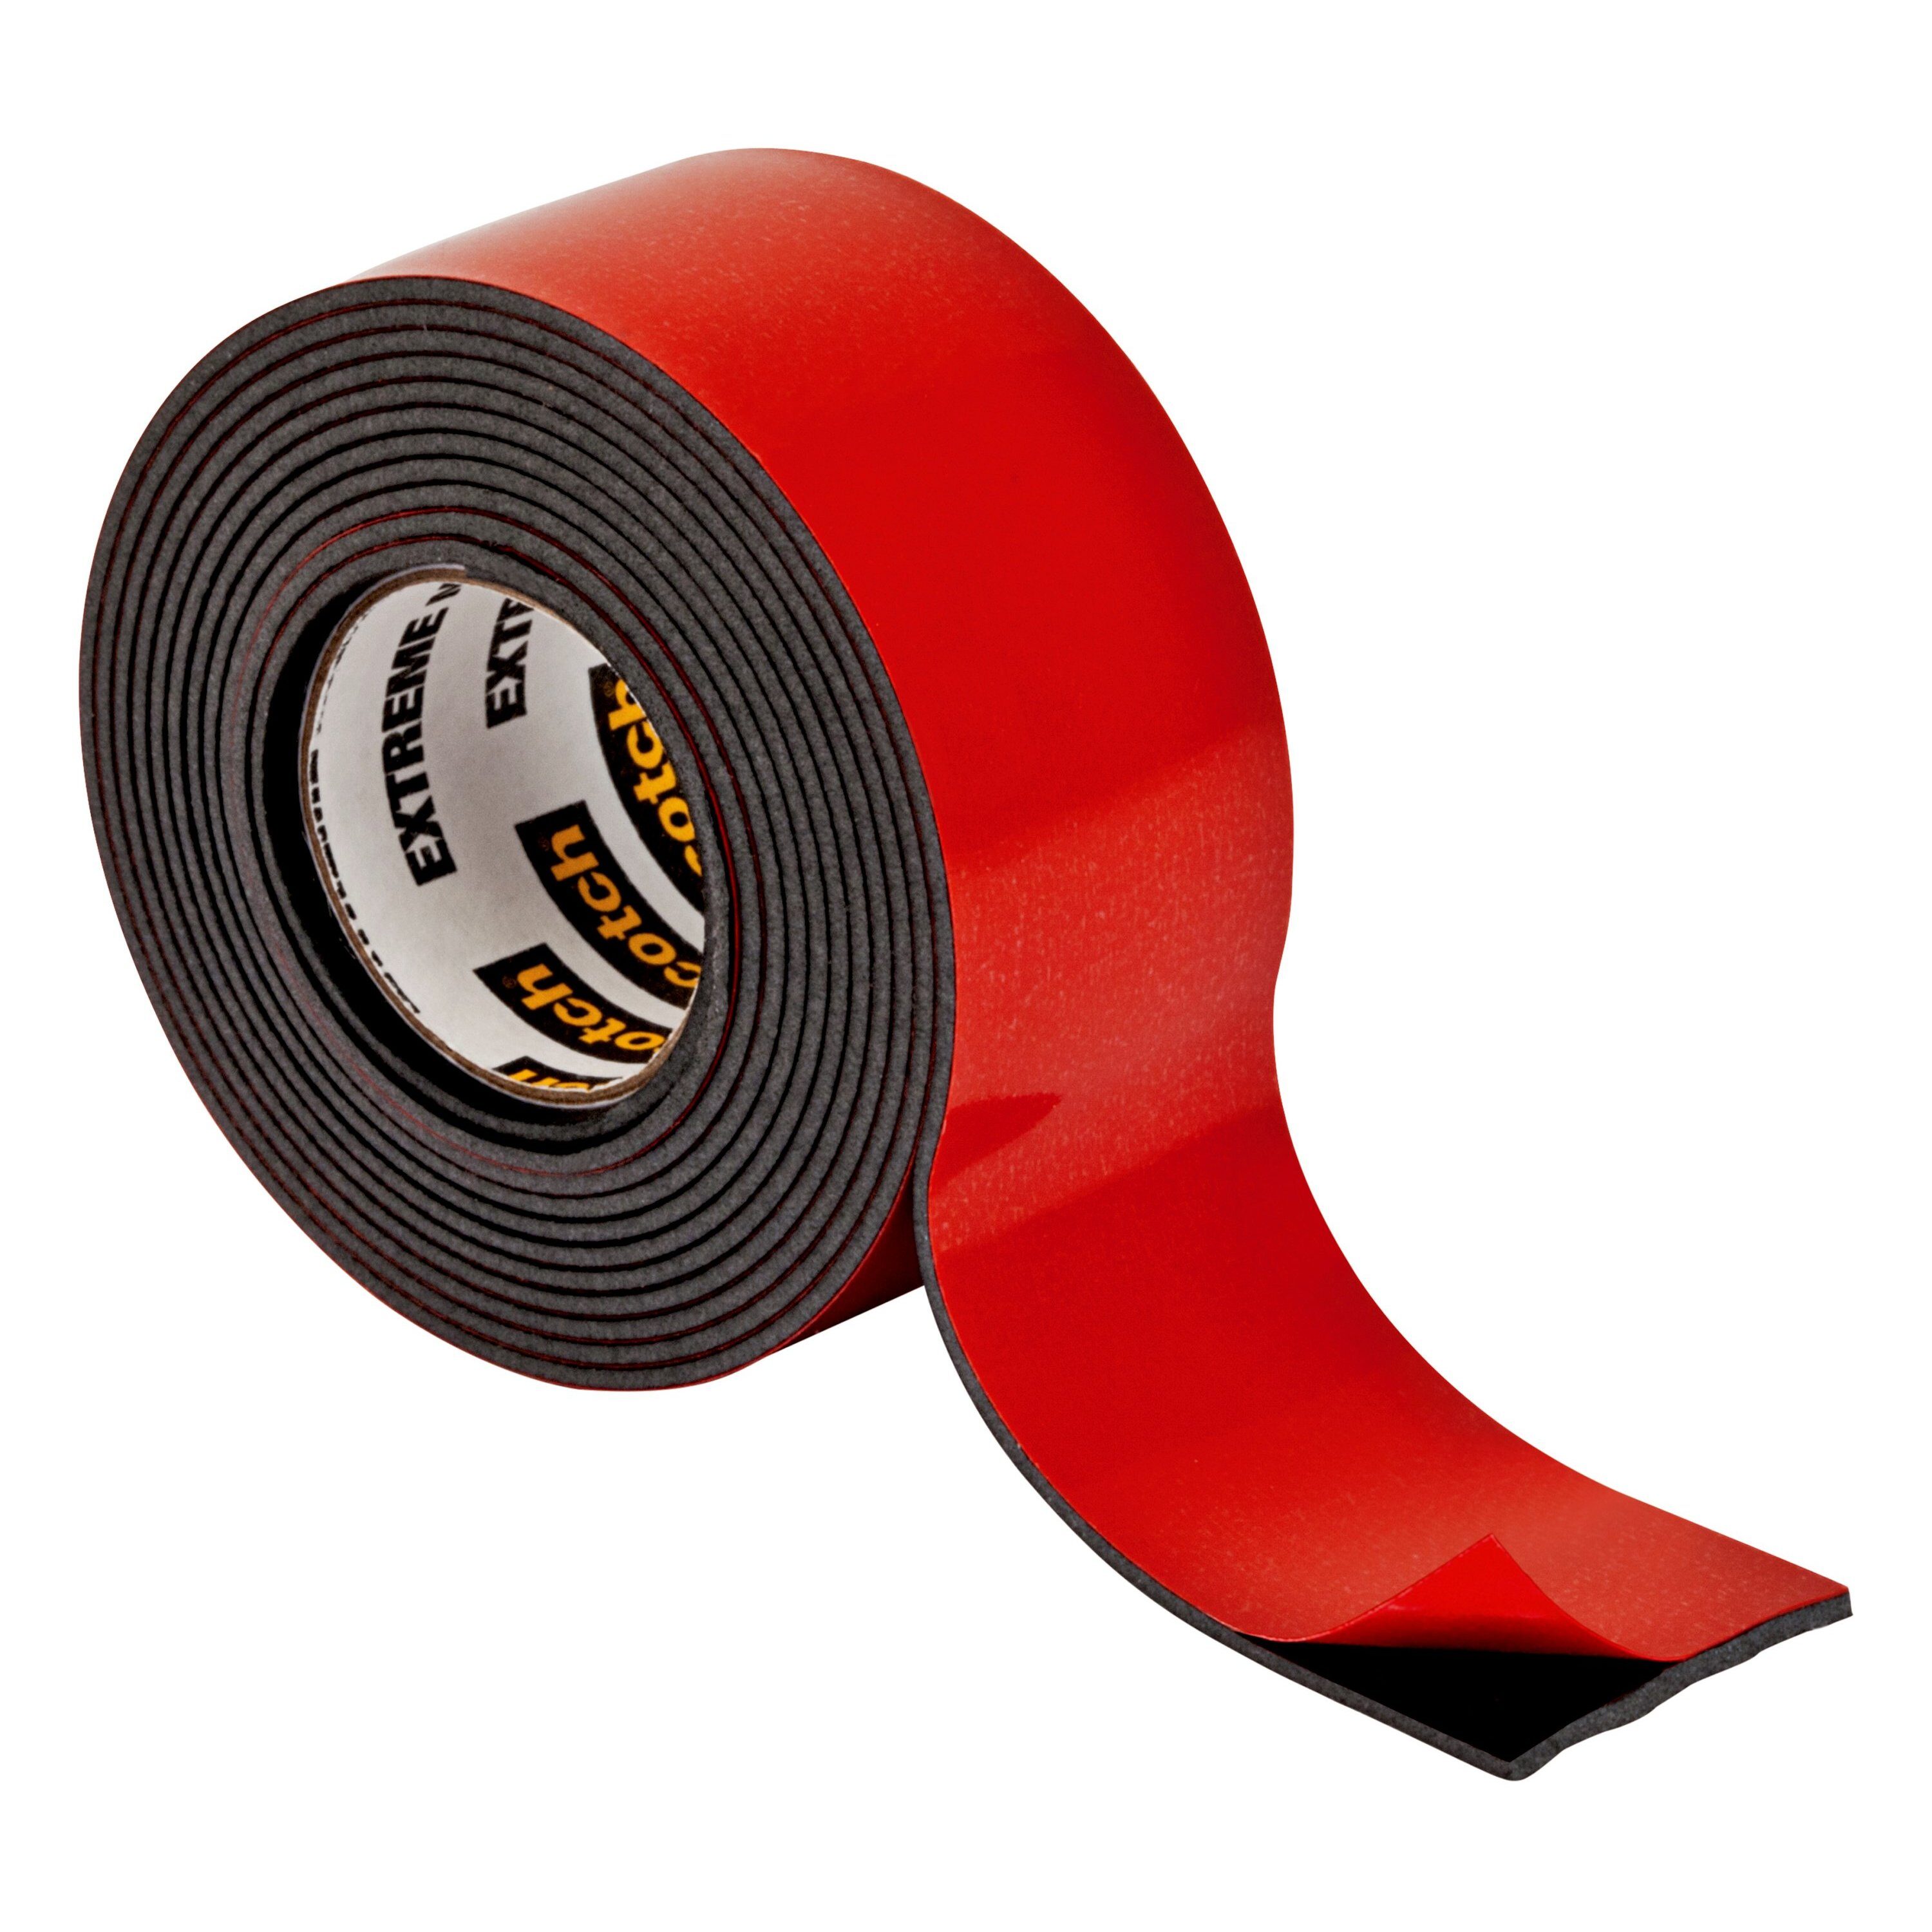 CANOPUS GBJHK5T 3M Double Sided Tape Heavy Duty: Mounting Tape